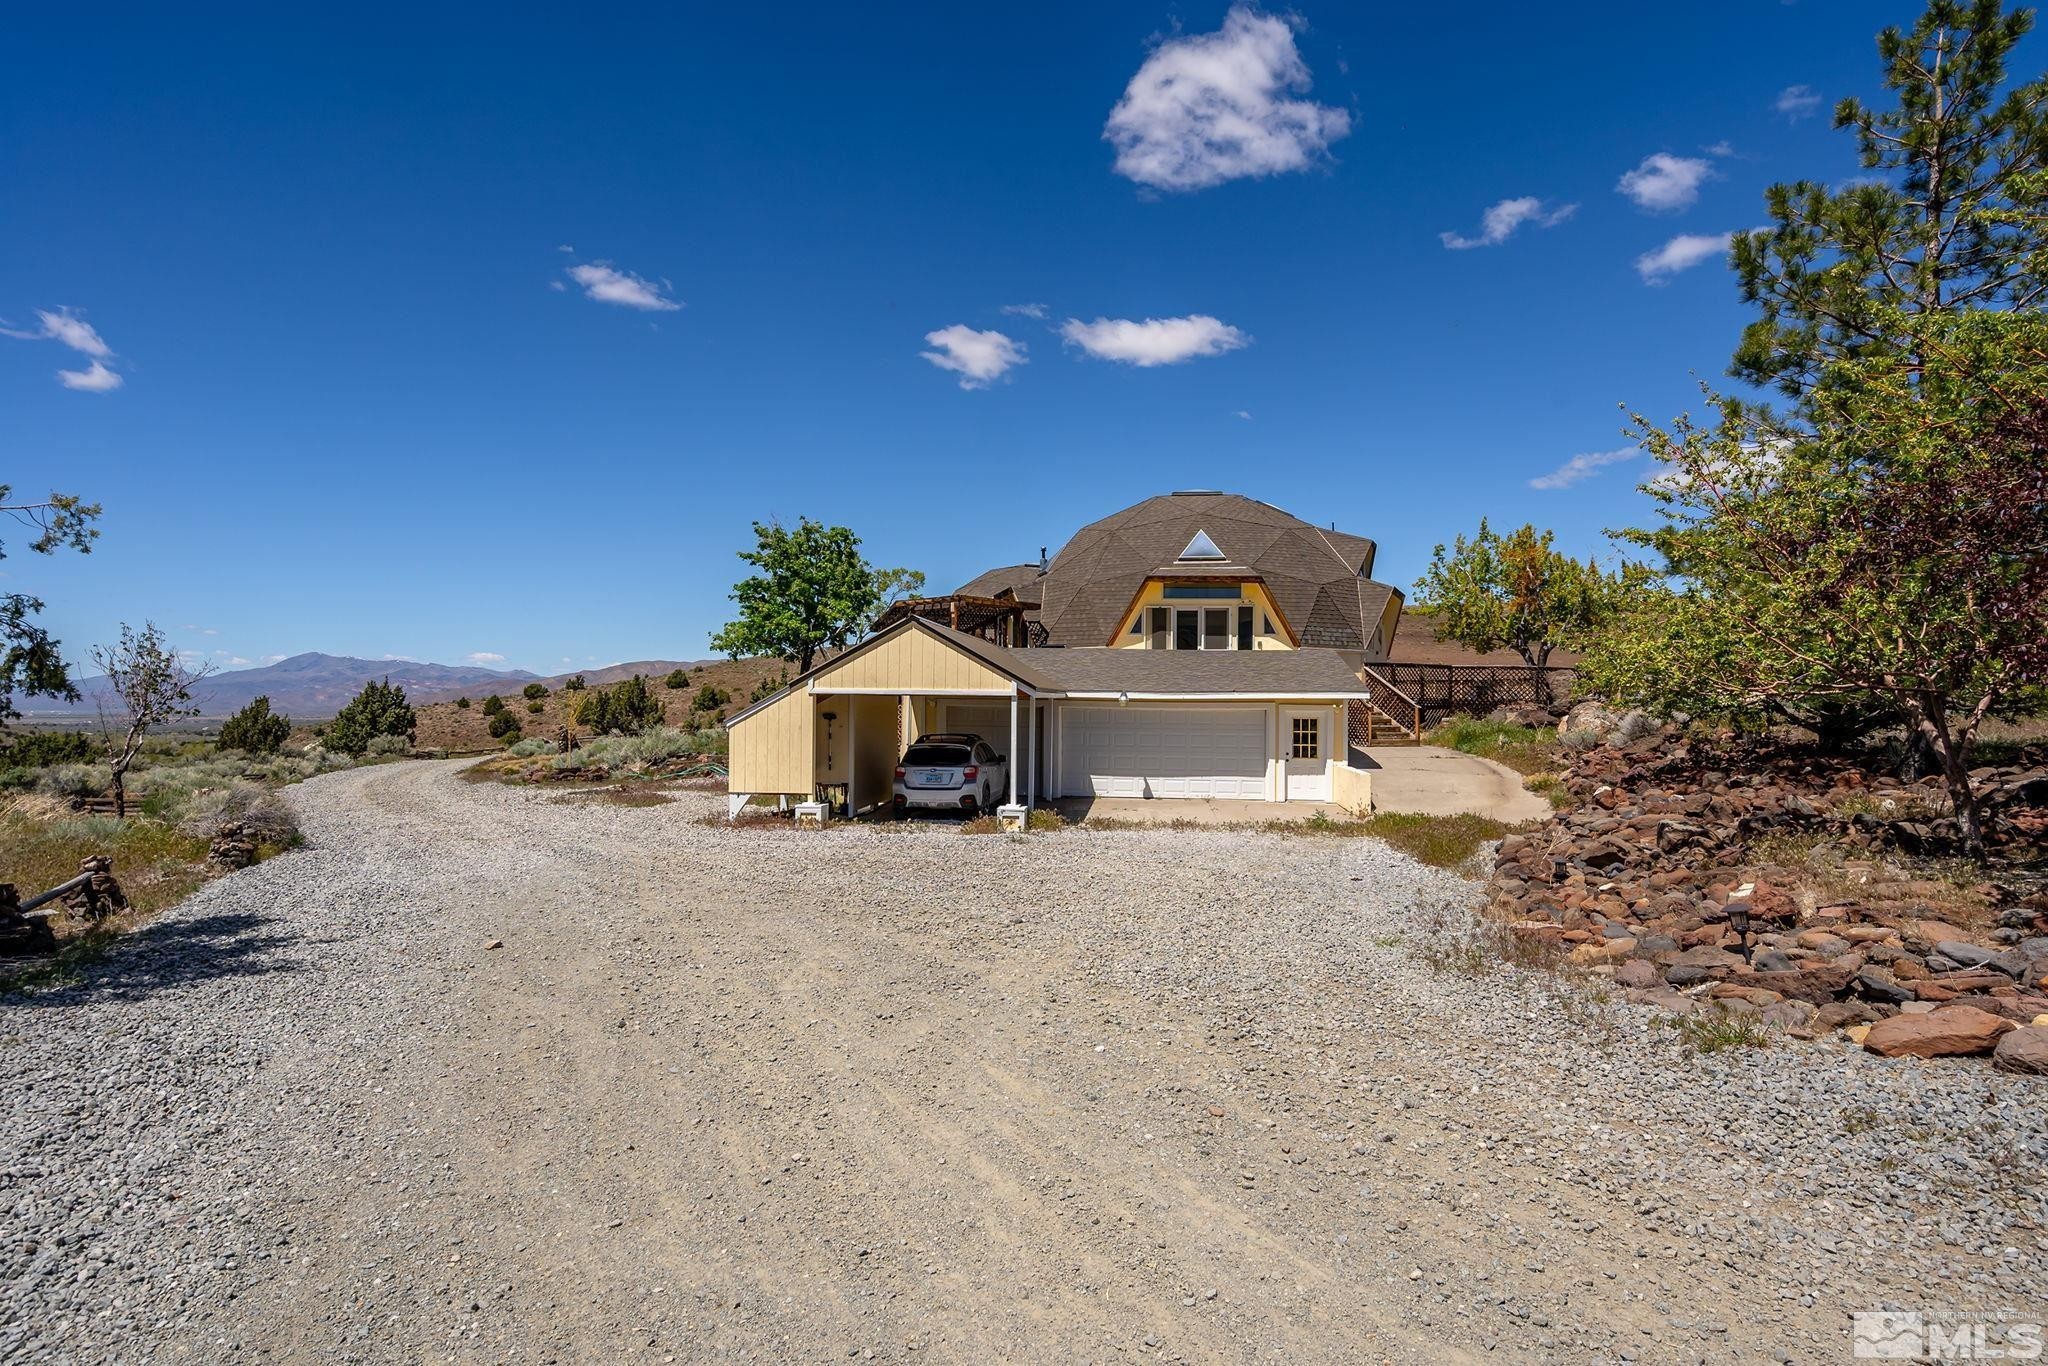 1. 2850 Wilcox Ranch Road